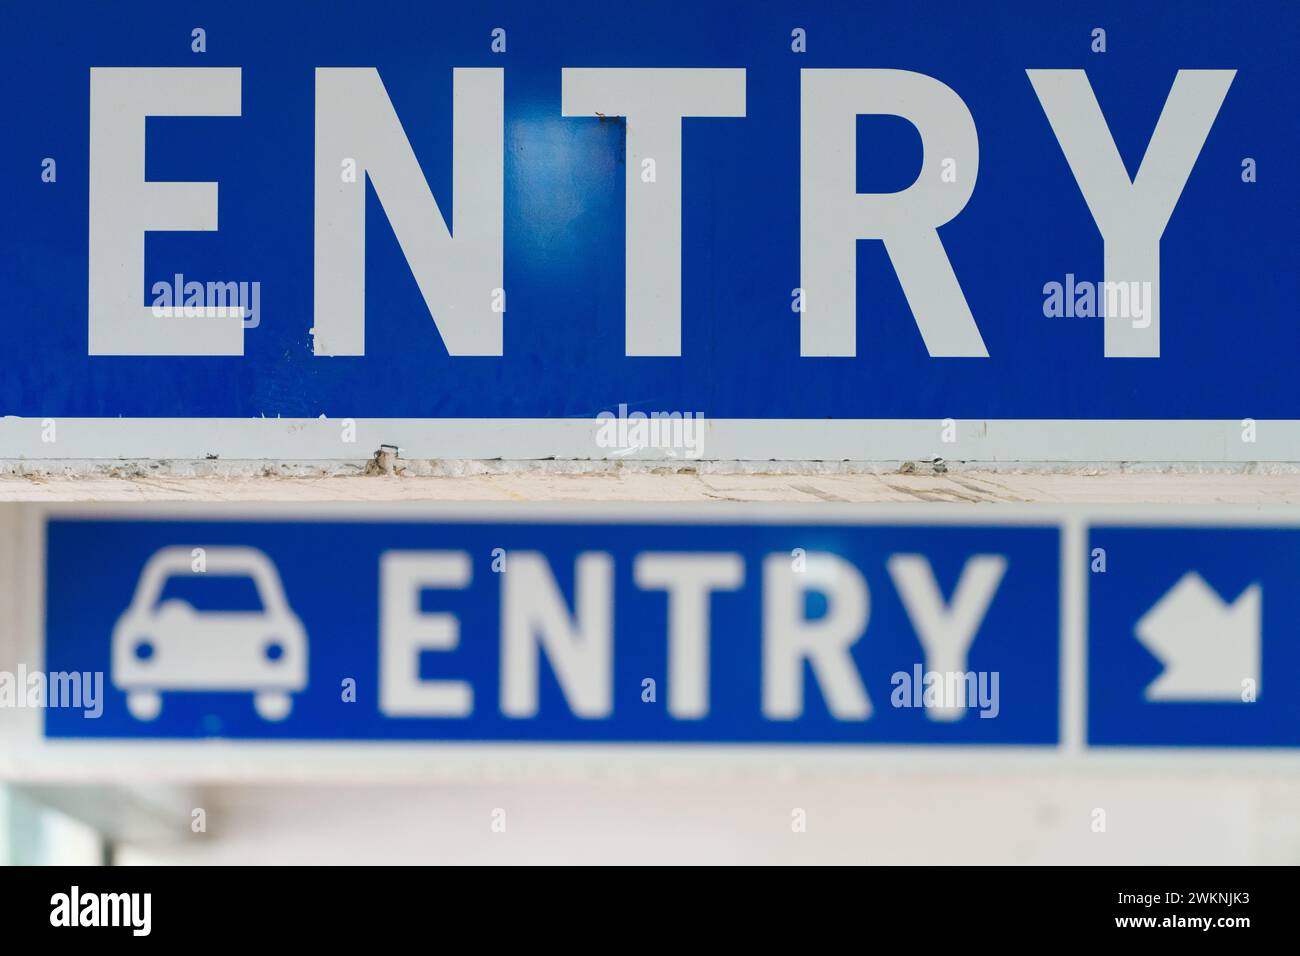 Public car park access point with entry sign, direction arrow and car symbol, white lettering on blue background, Melbourne city, Australia. Stock Photo